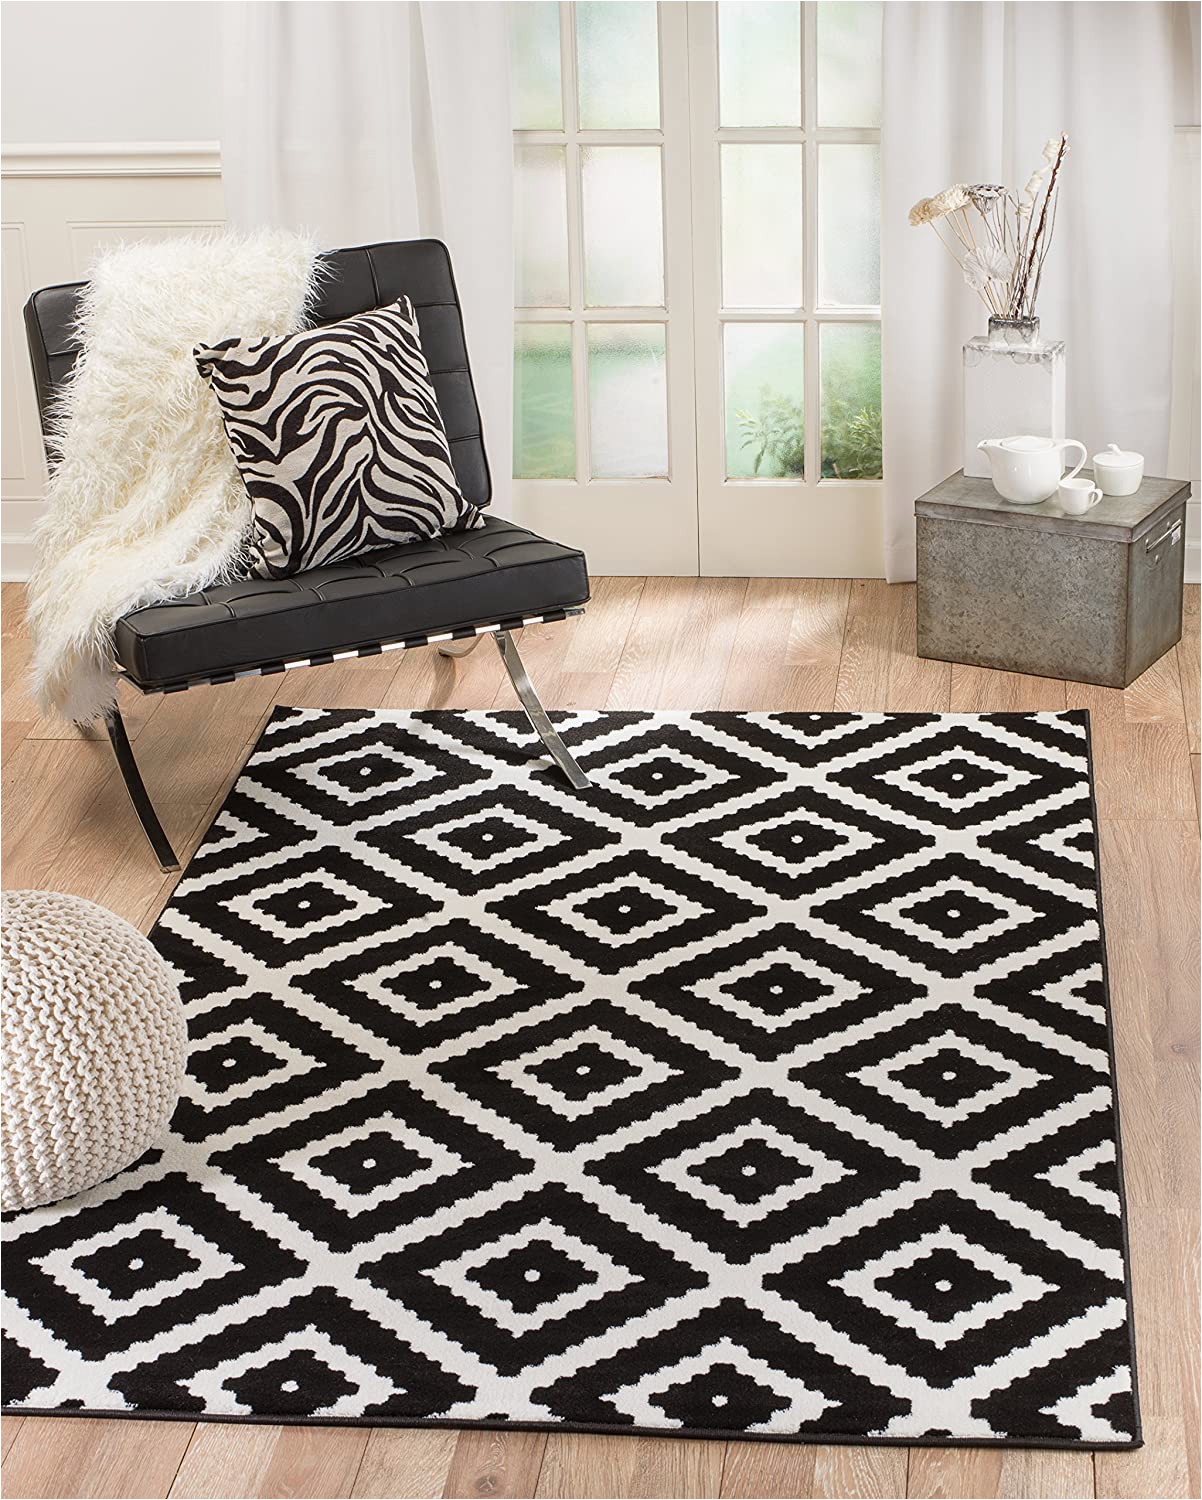 4 X 10 area Rug Summit 46 Black White Diamond area Rug Modern Abstract Many Sizes Available 7 4" X 10 6"